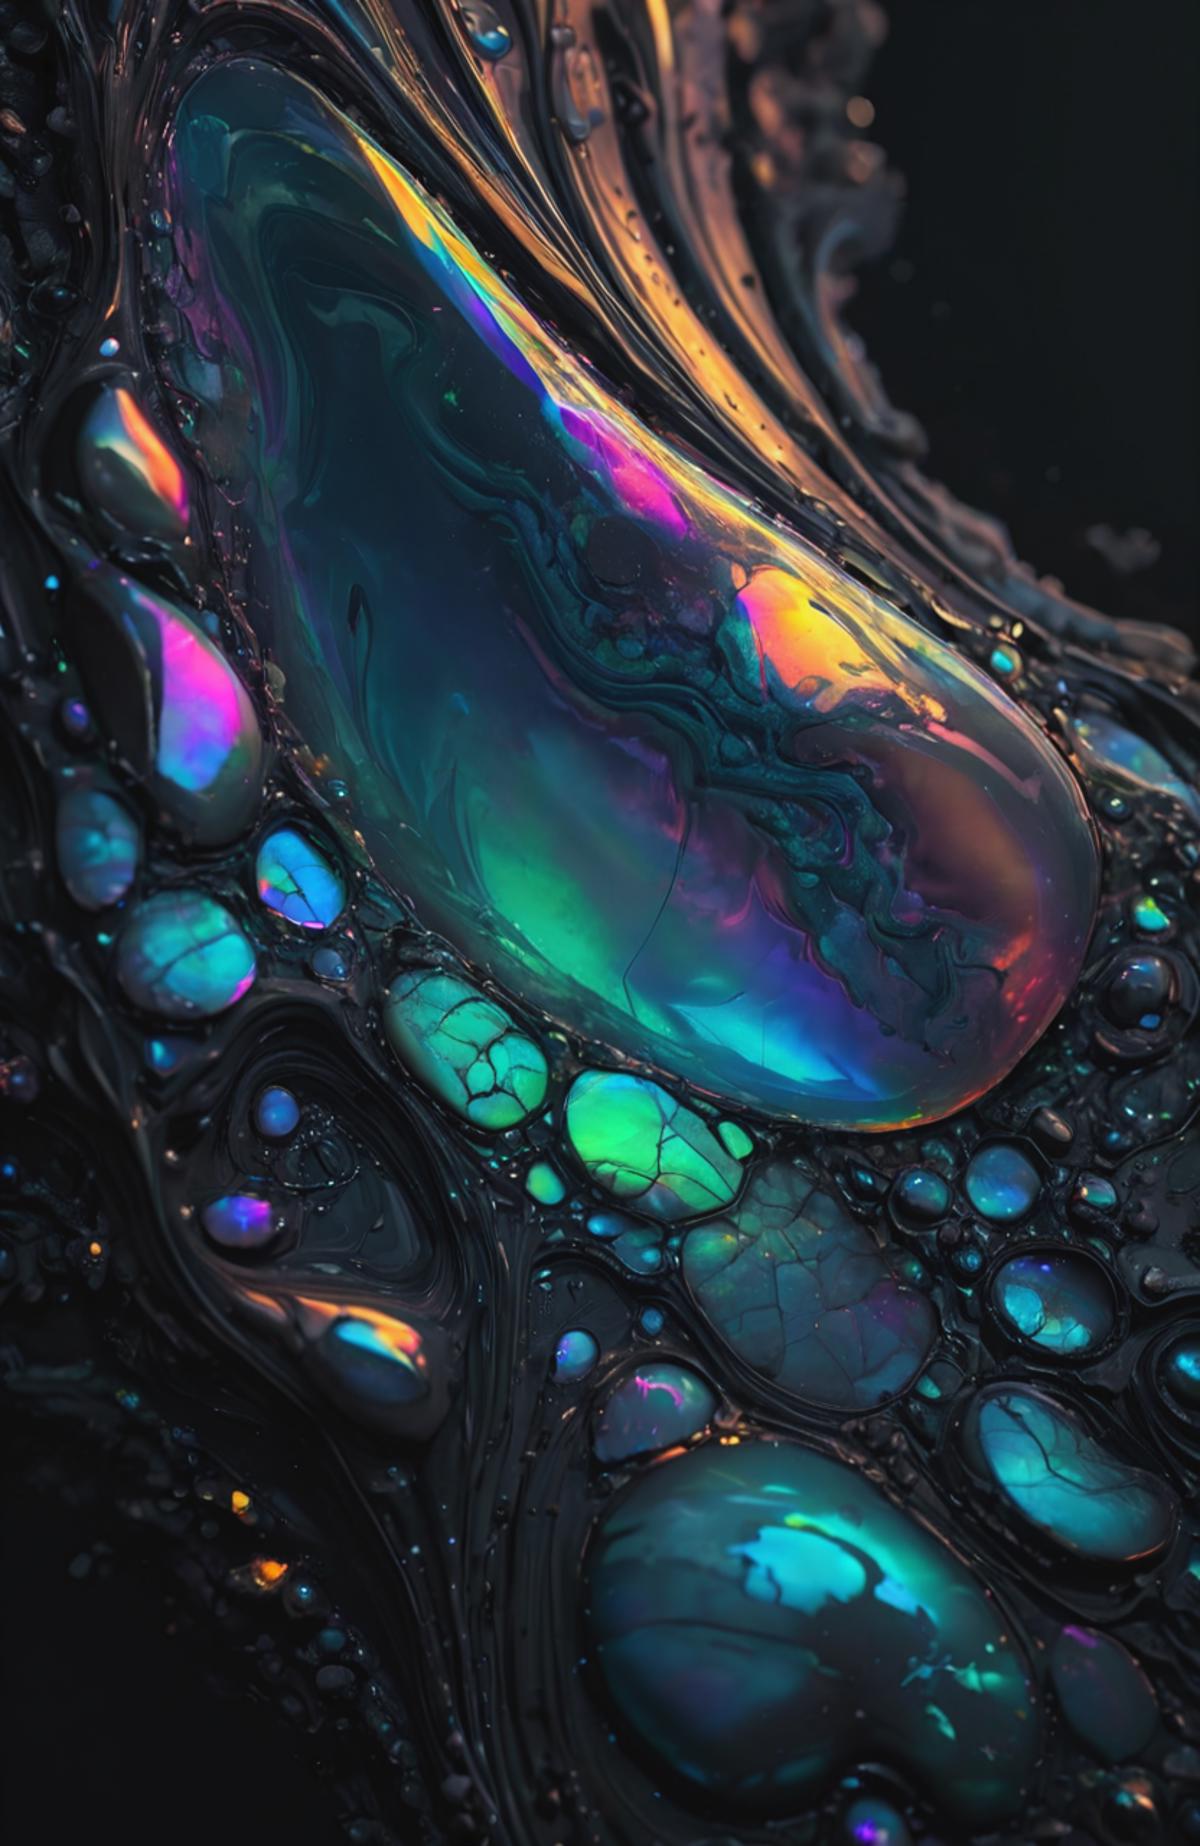 IOS_Iridescent opal style image by antinoice